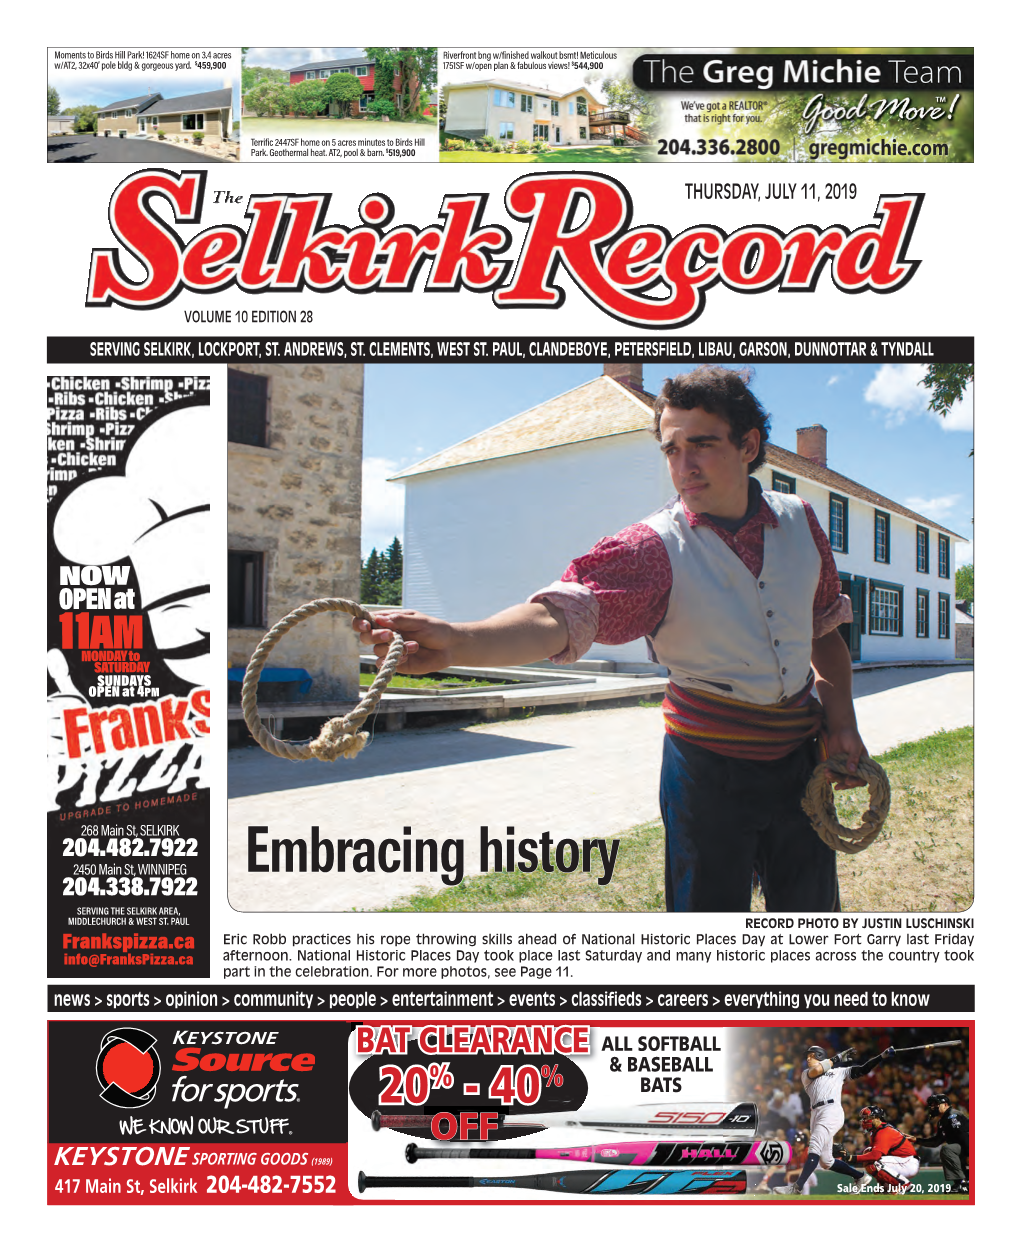 LE Selkirk Record 071119.Indd